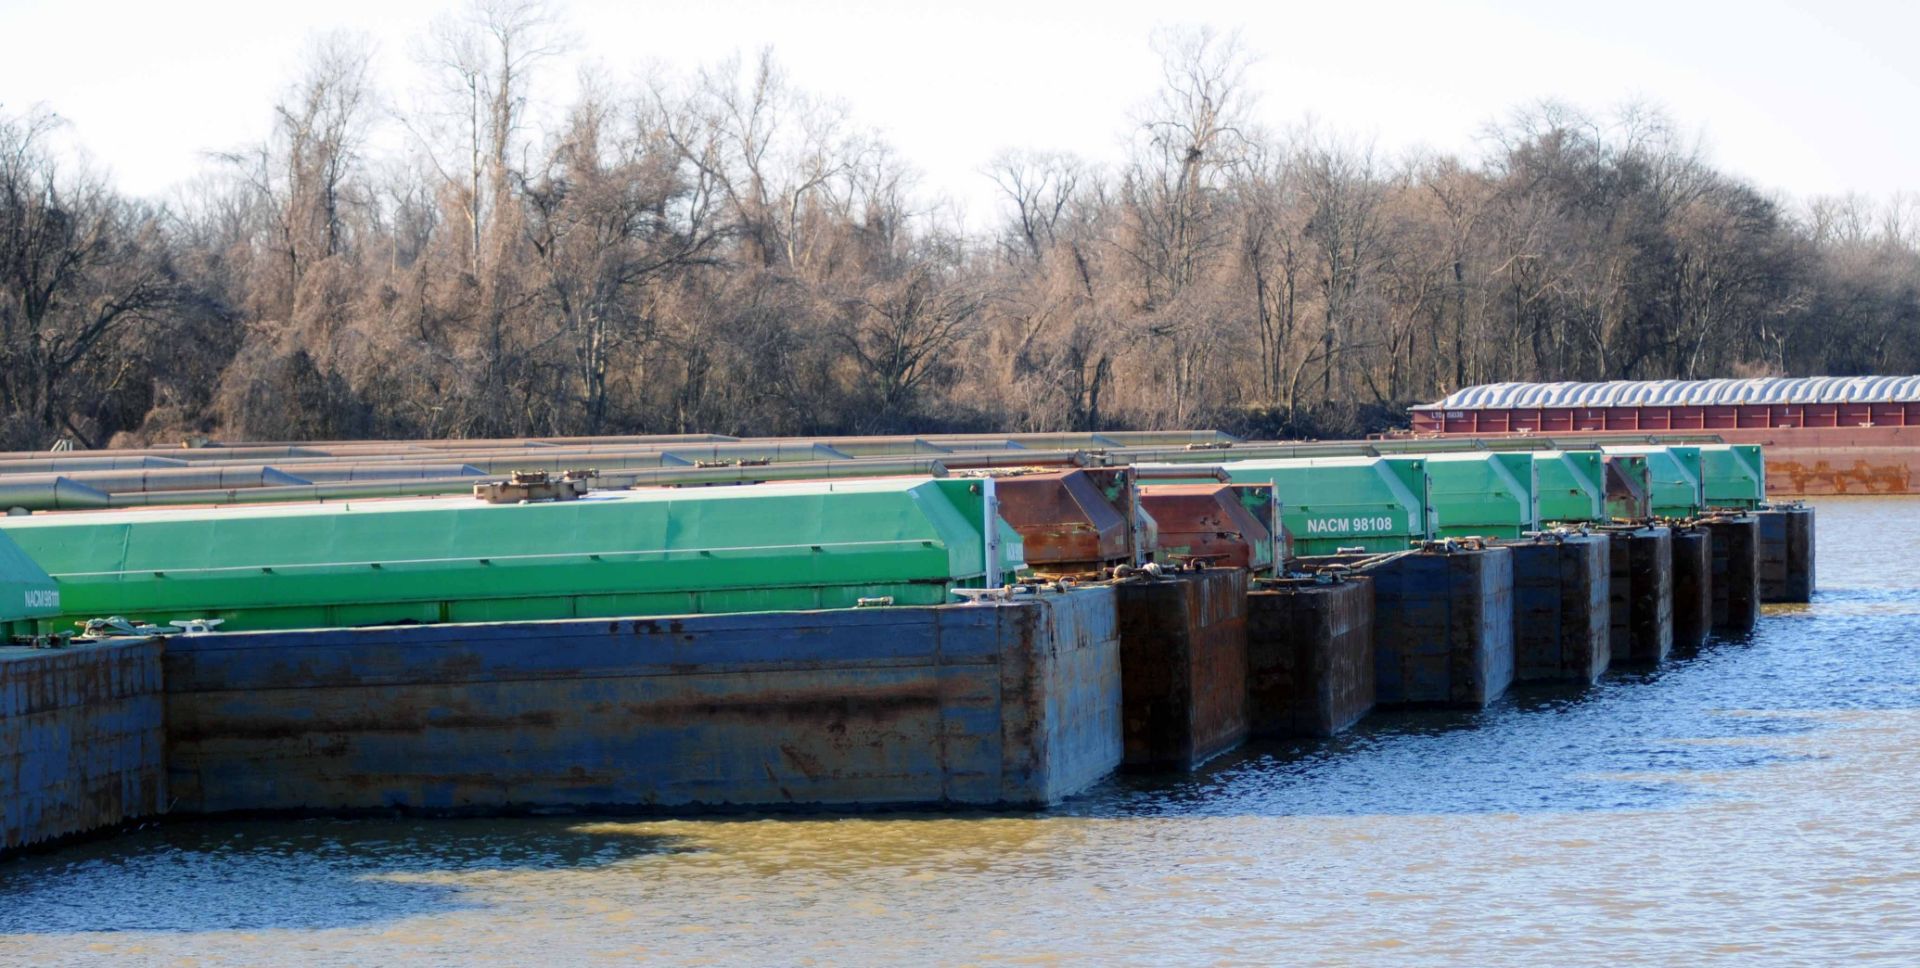 BARGE #NACM98108, (1) USED INDEPENDENT RIVER/SEA GOING TANK BARGE: approximate barge dimensions 200' - Image 8 of 10